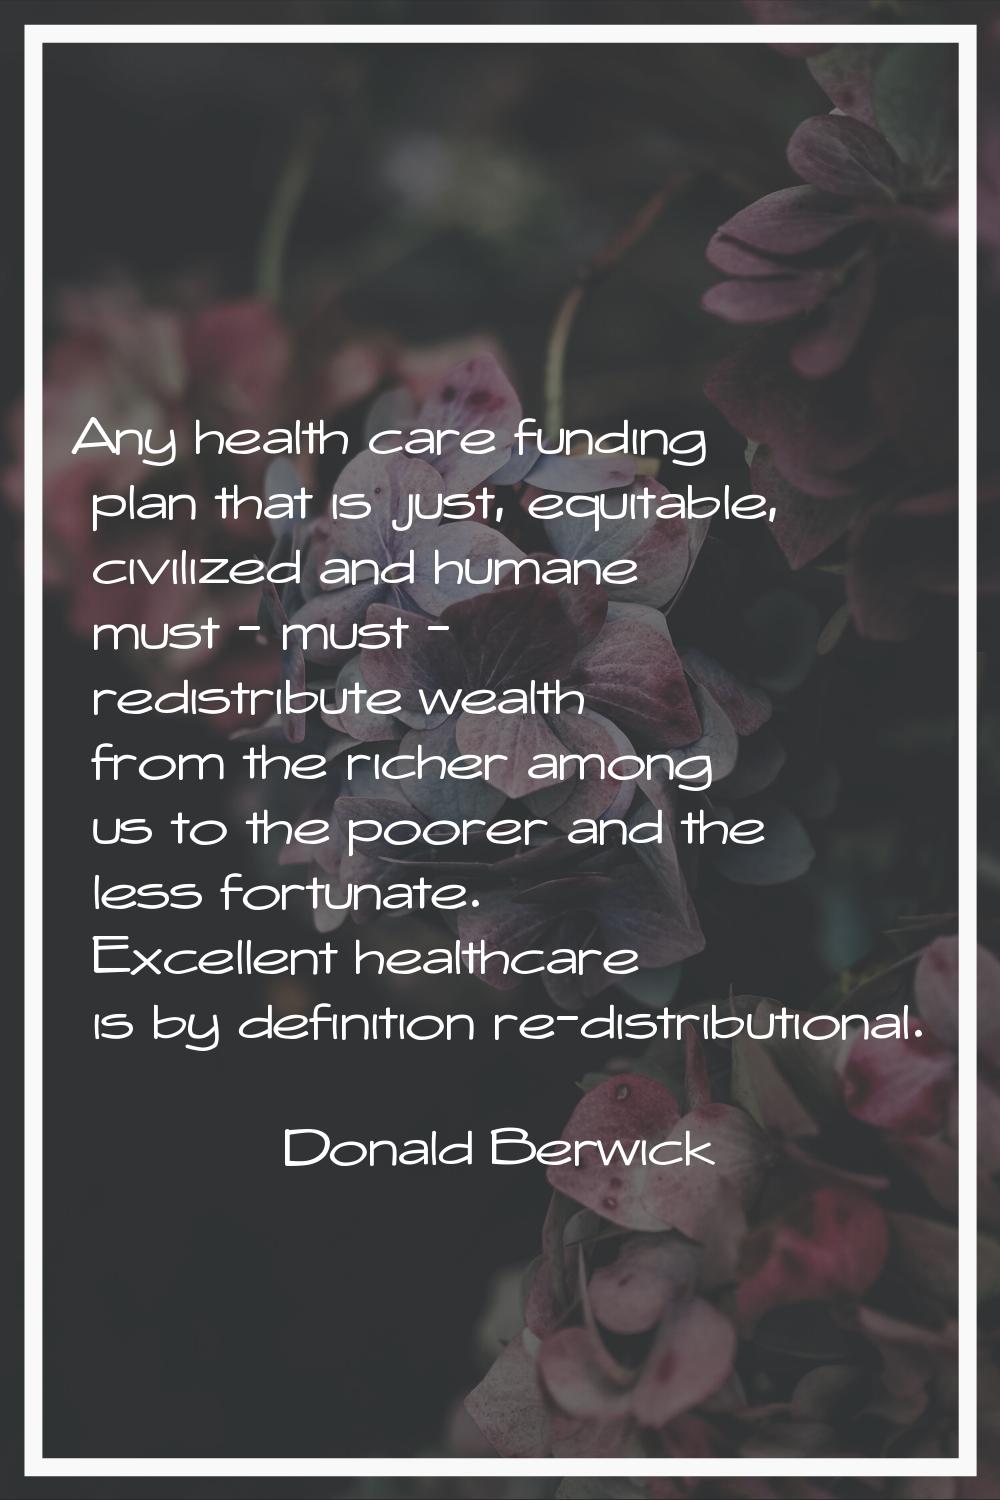 Any health care funding plan that is just, equitable, civilized and humane must - must - redistribu